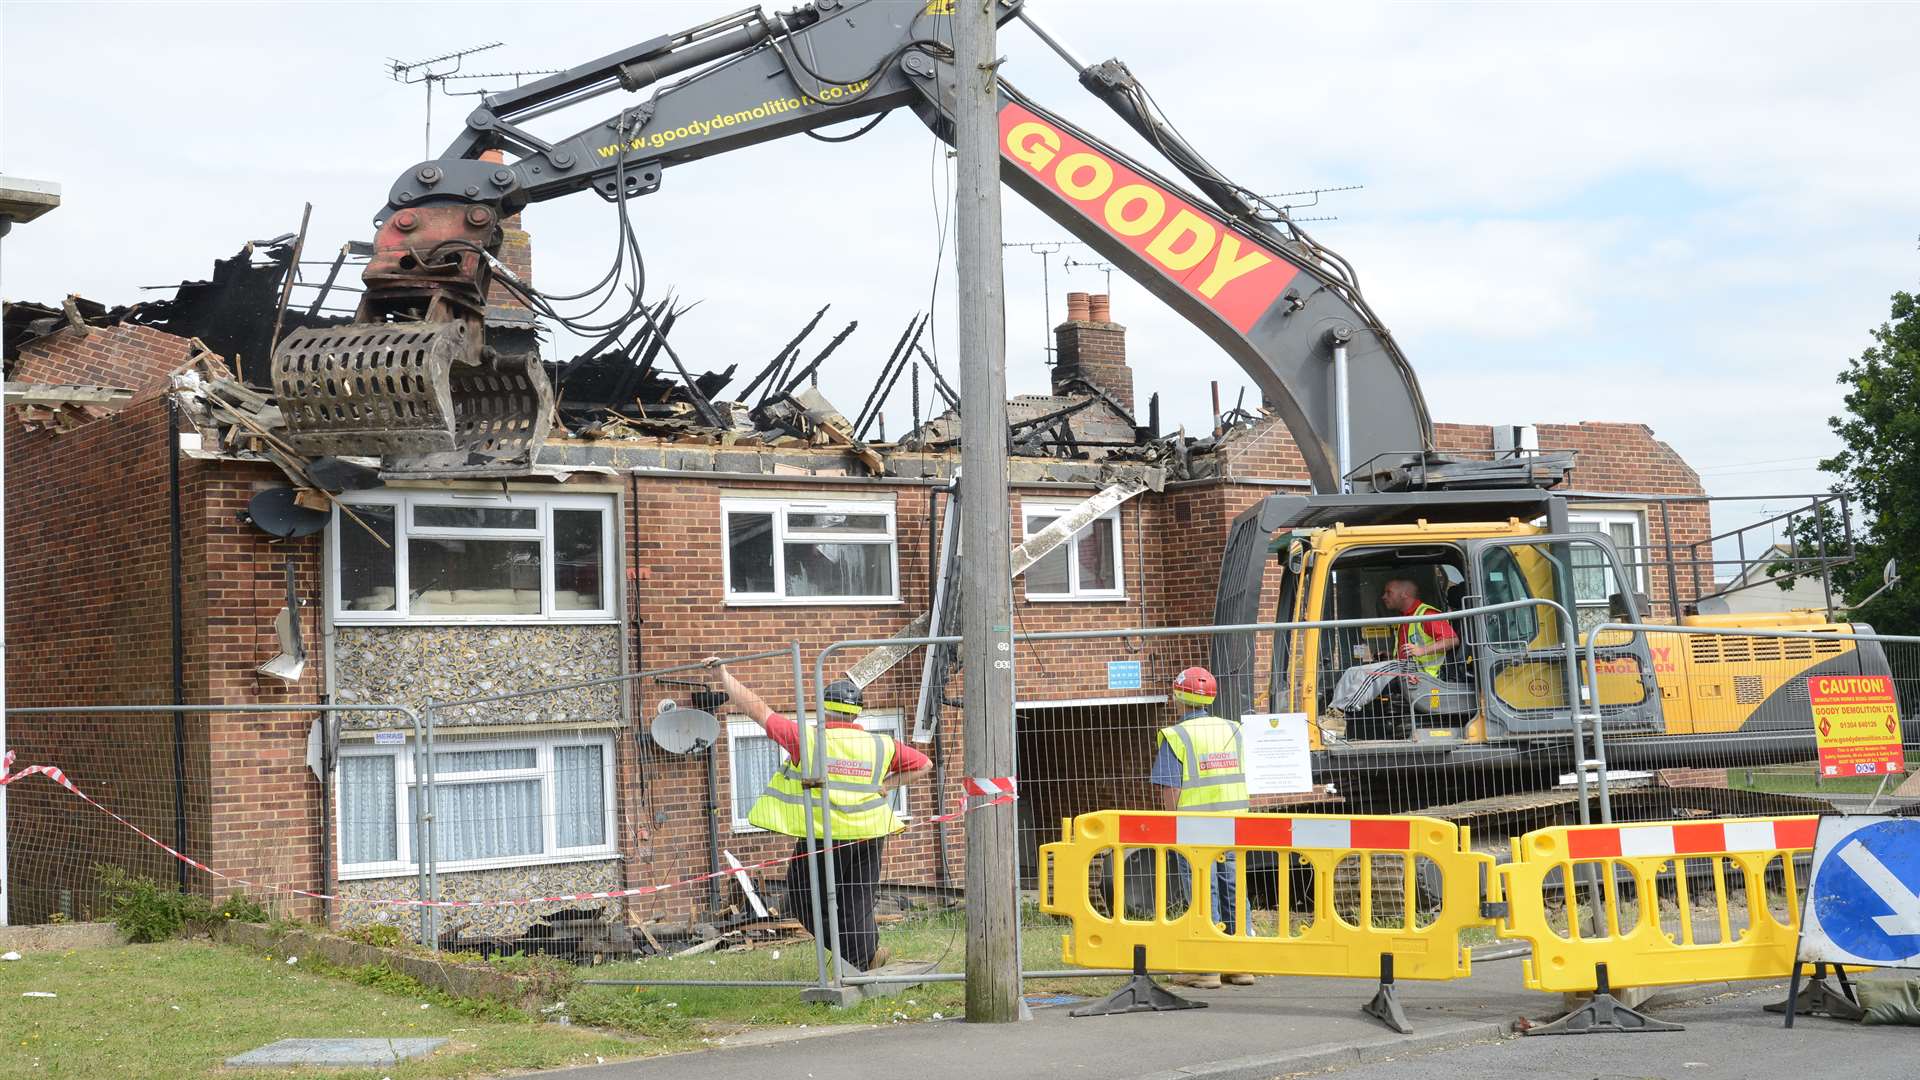 Demolition beginning at the scene of the fire in Little Knoll